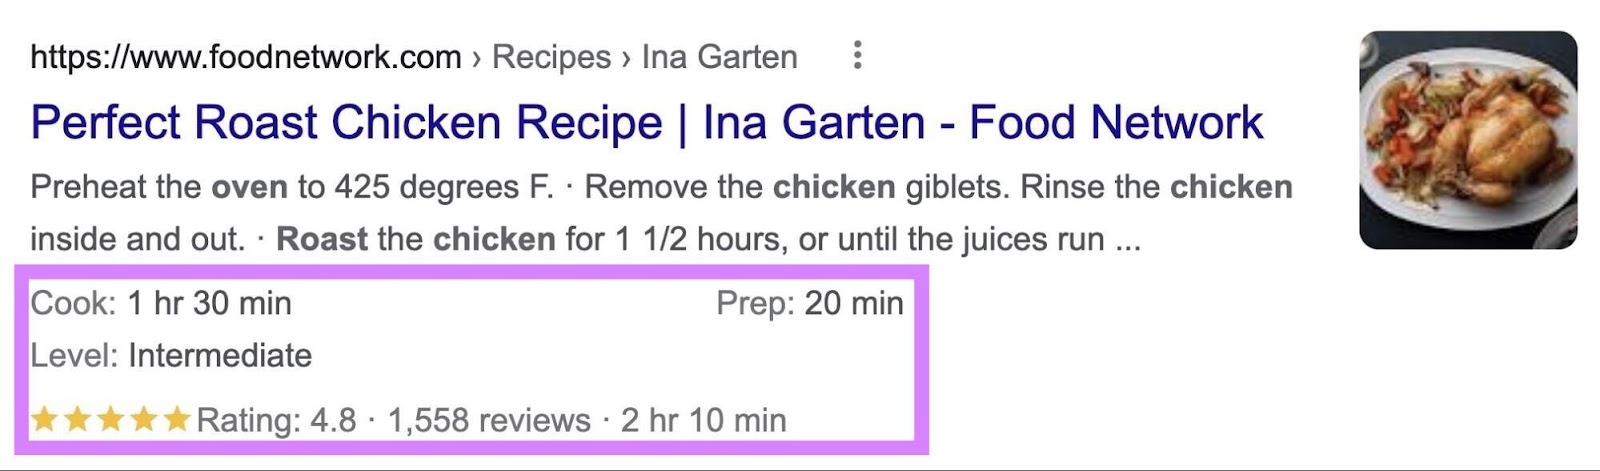 A rich snippet for a recipe including cook time, level and rating